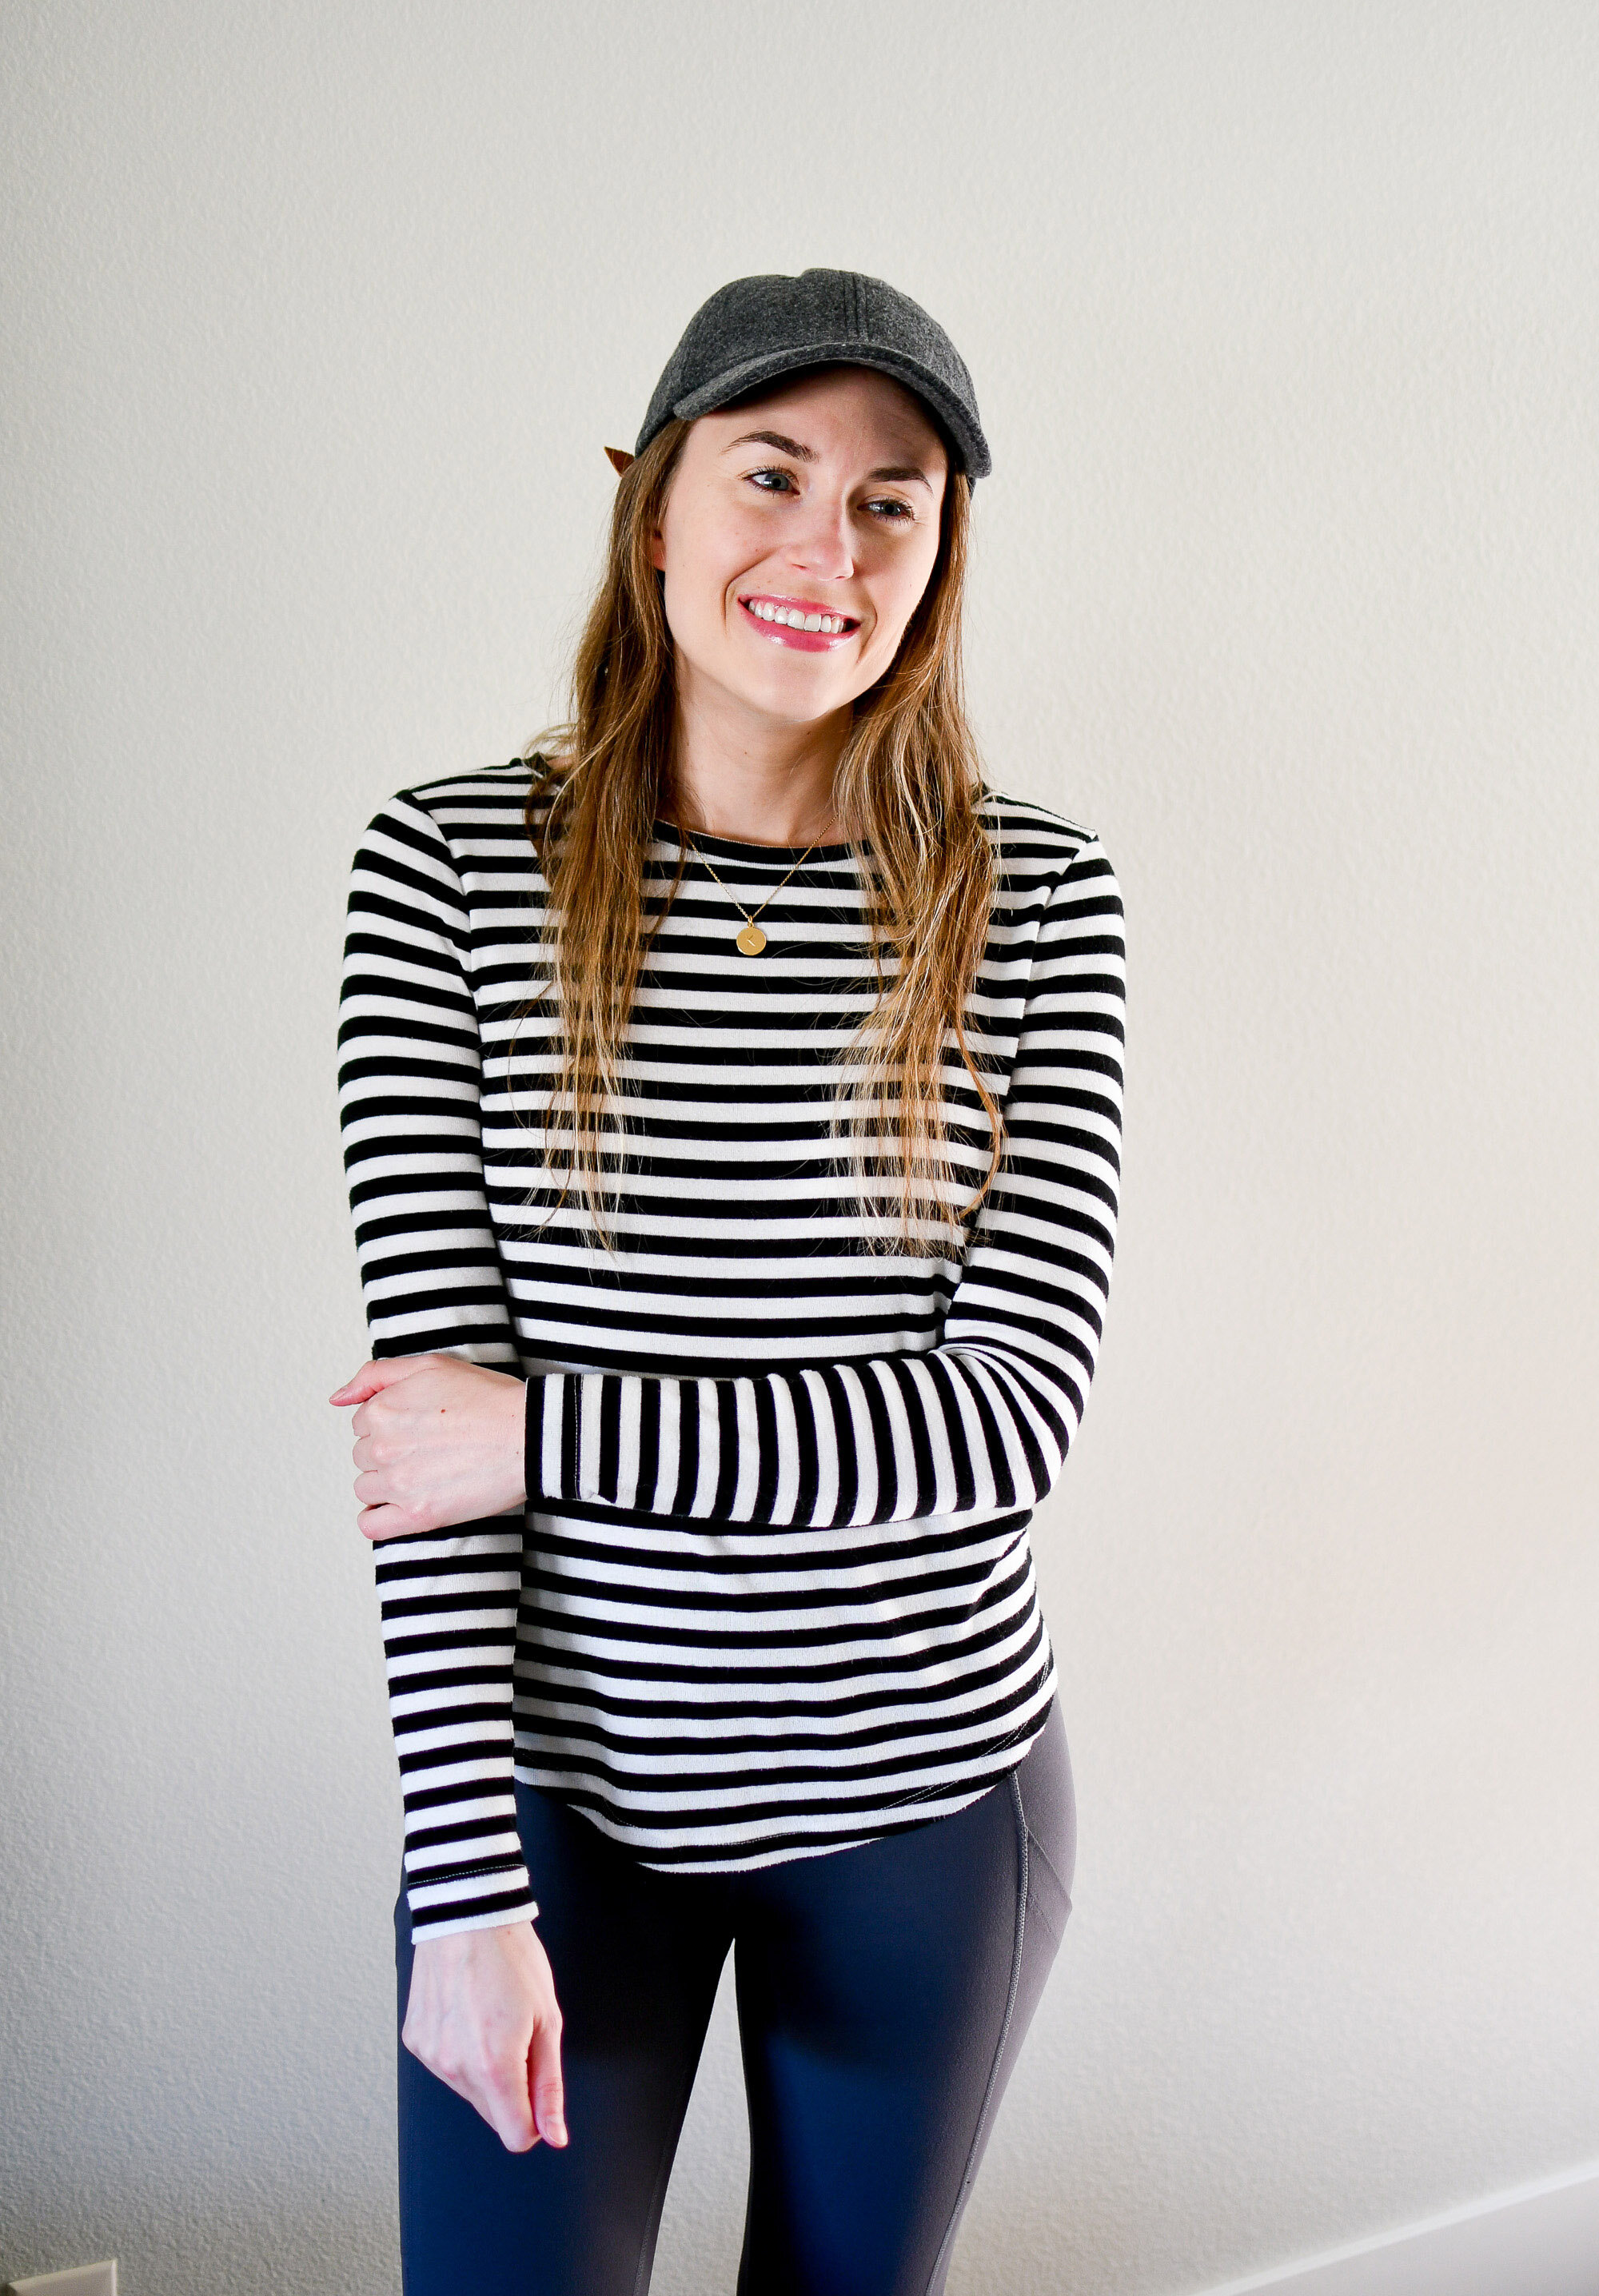 Wool baseball cap casual outfit with black and white striped tee — Cotton Cashmere Cat Hair